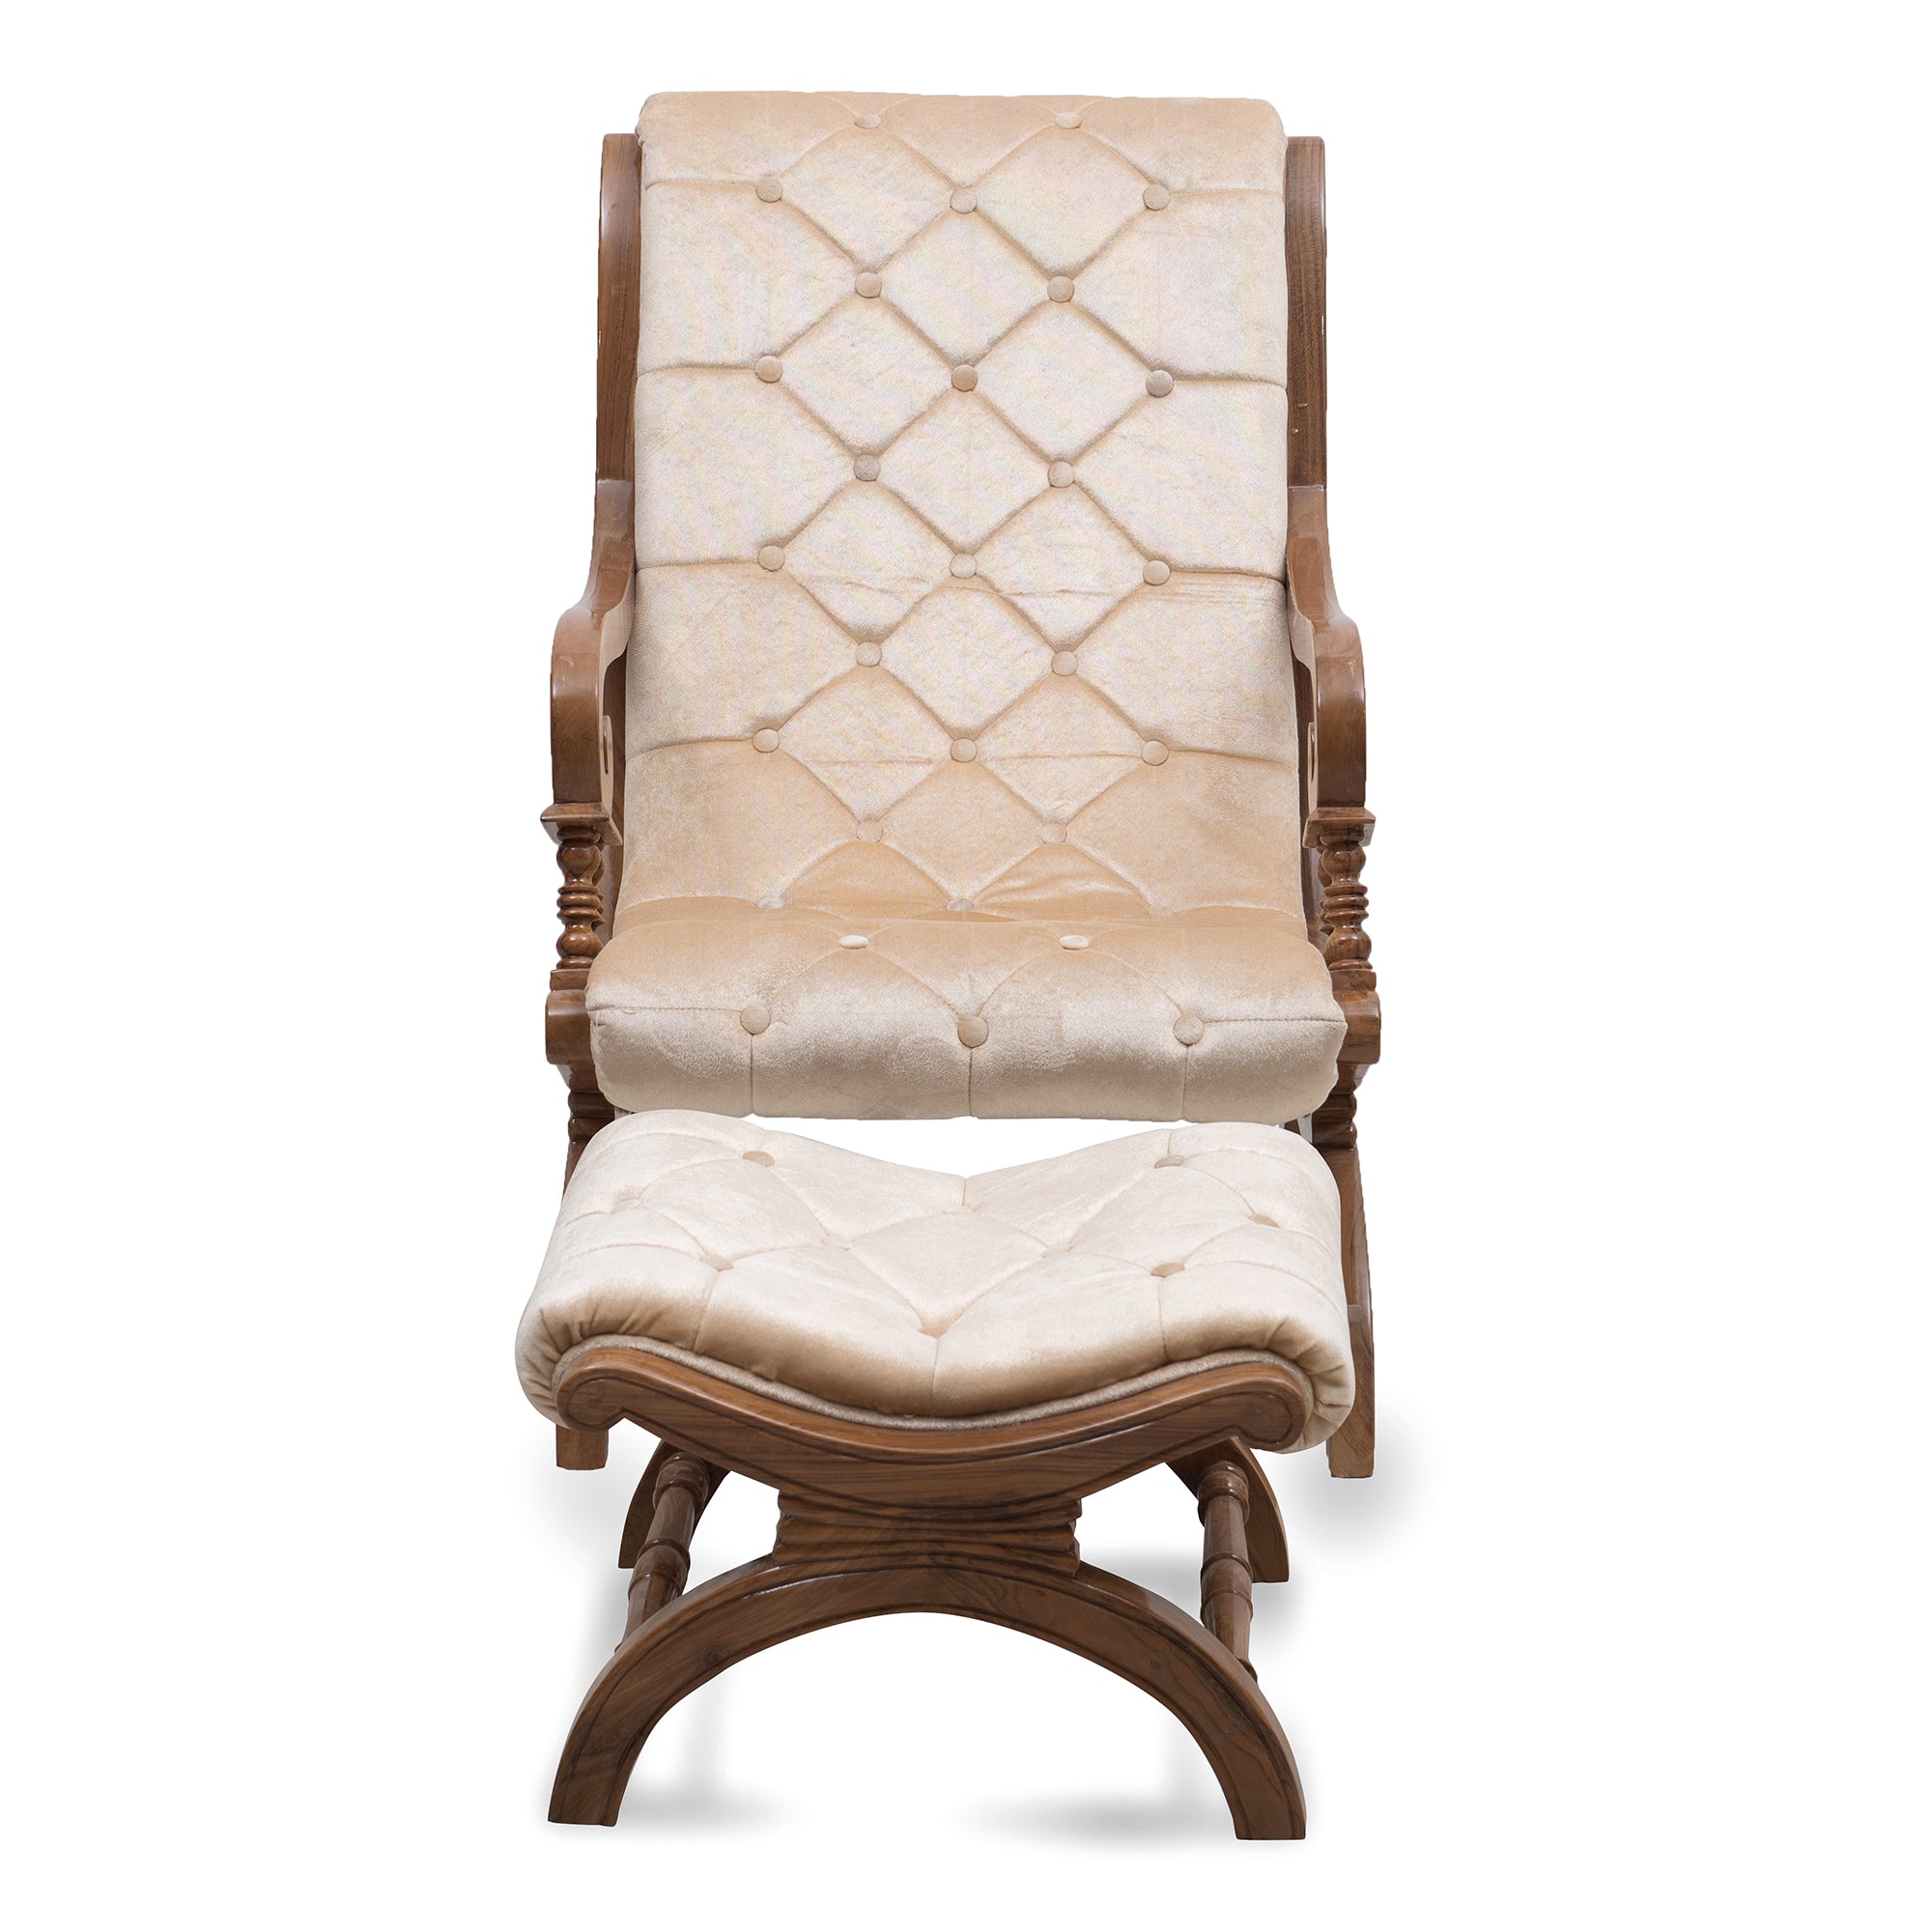 Butros Wooden Aaram Chair with Footer